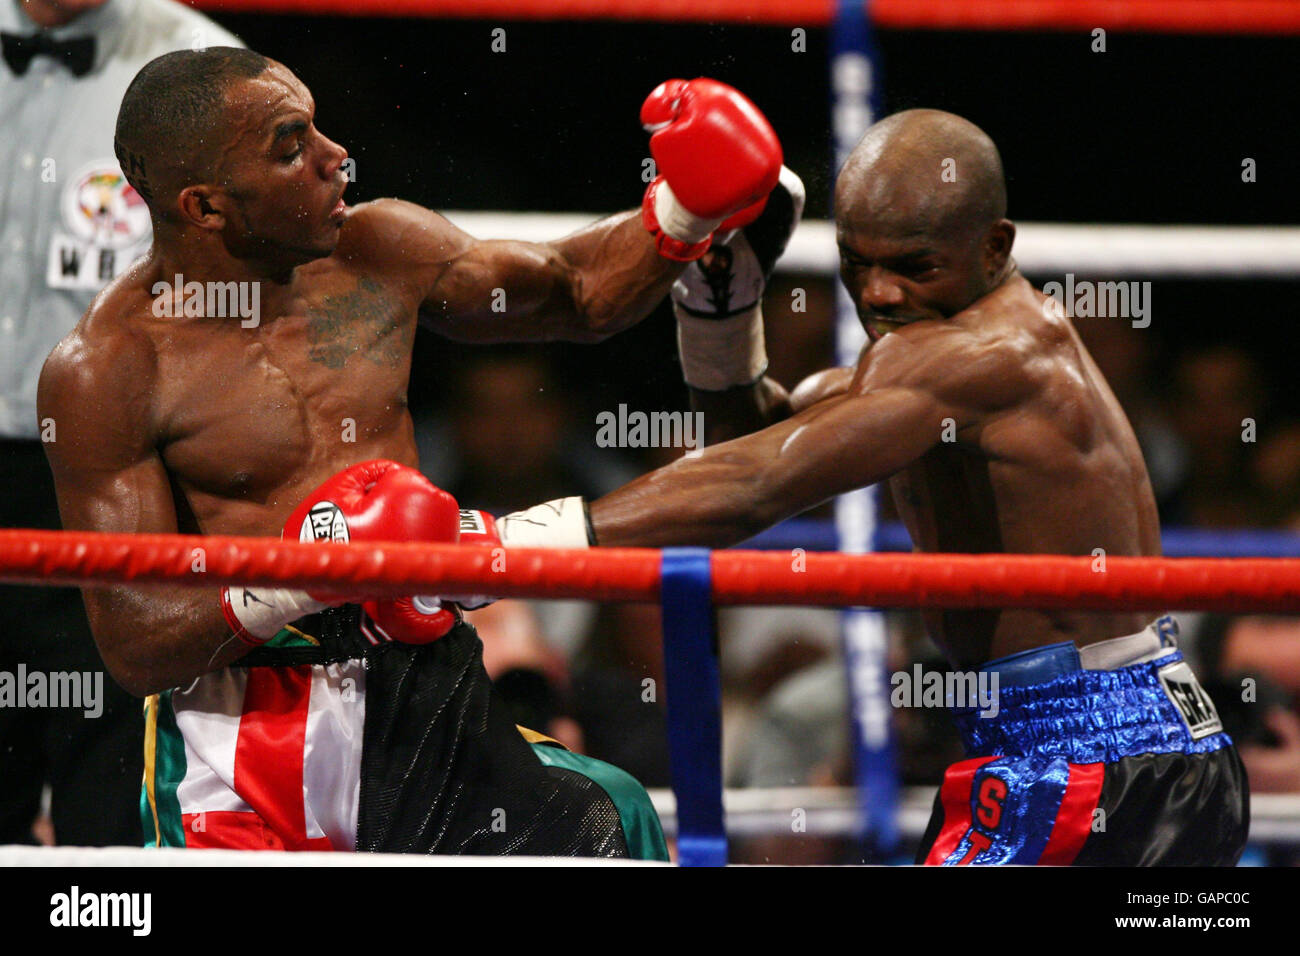 Boxing - WBC Light-Welterweight Title - Junior Witter v Timothy Bradley - Nottingham Arena. England's Junior Witter and USA's Timothy Bradley exchange punches during the WBC Light-Welterweight Title bout at Nottingham Arena. Stock Photo